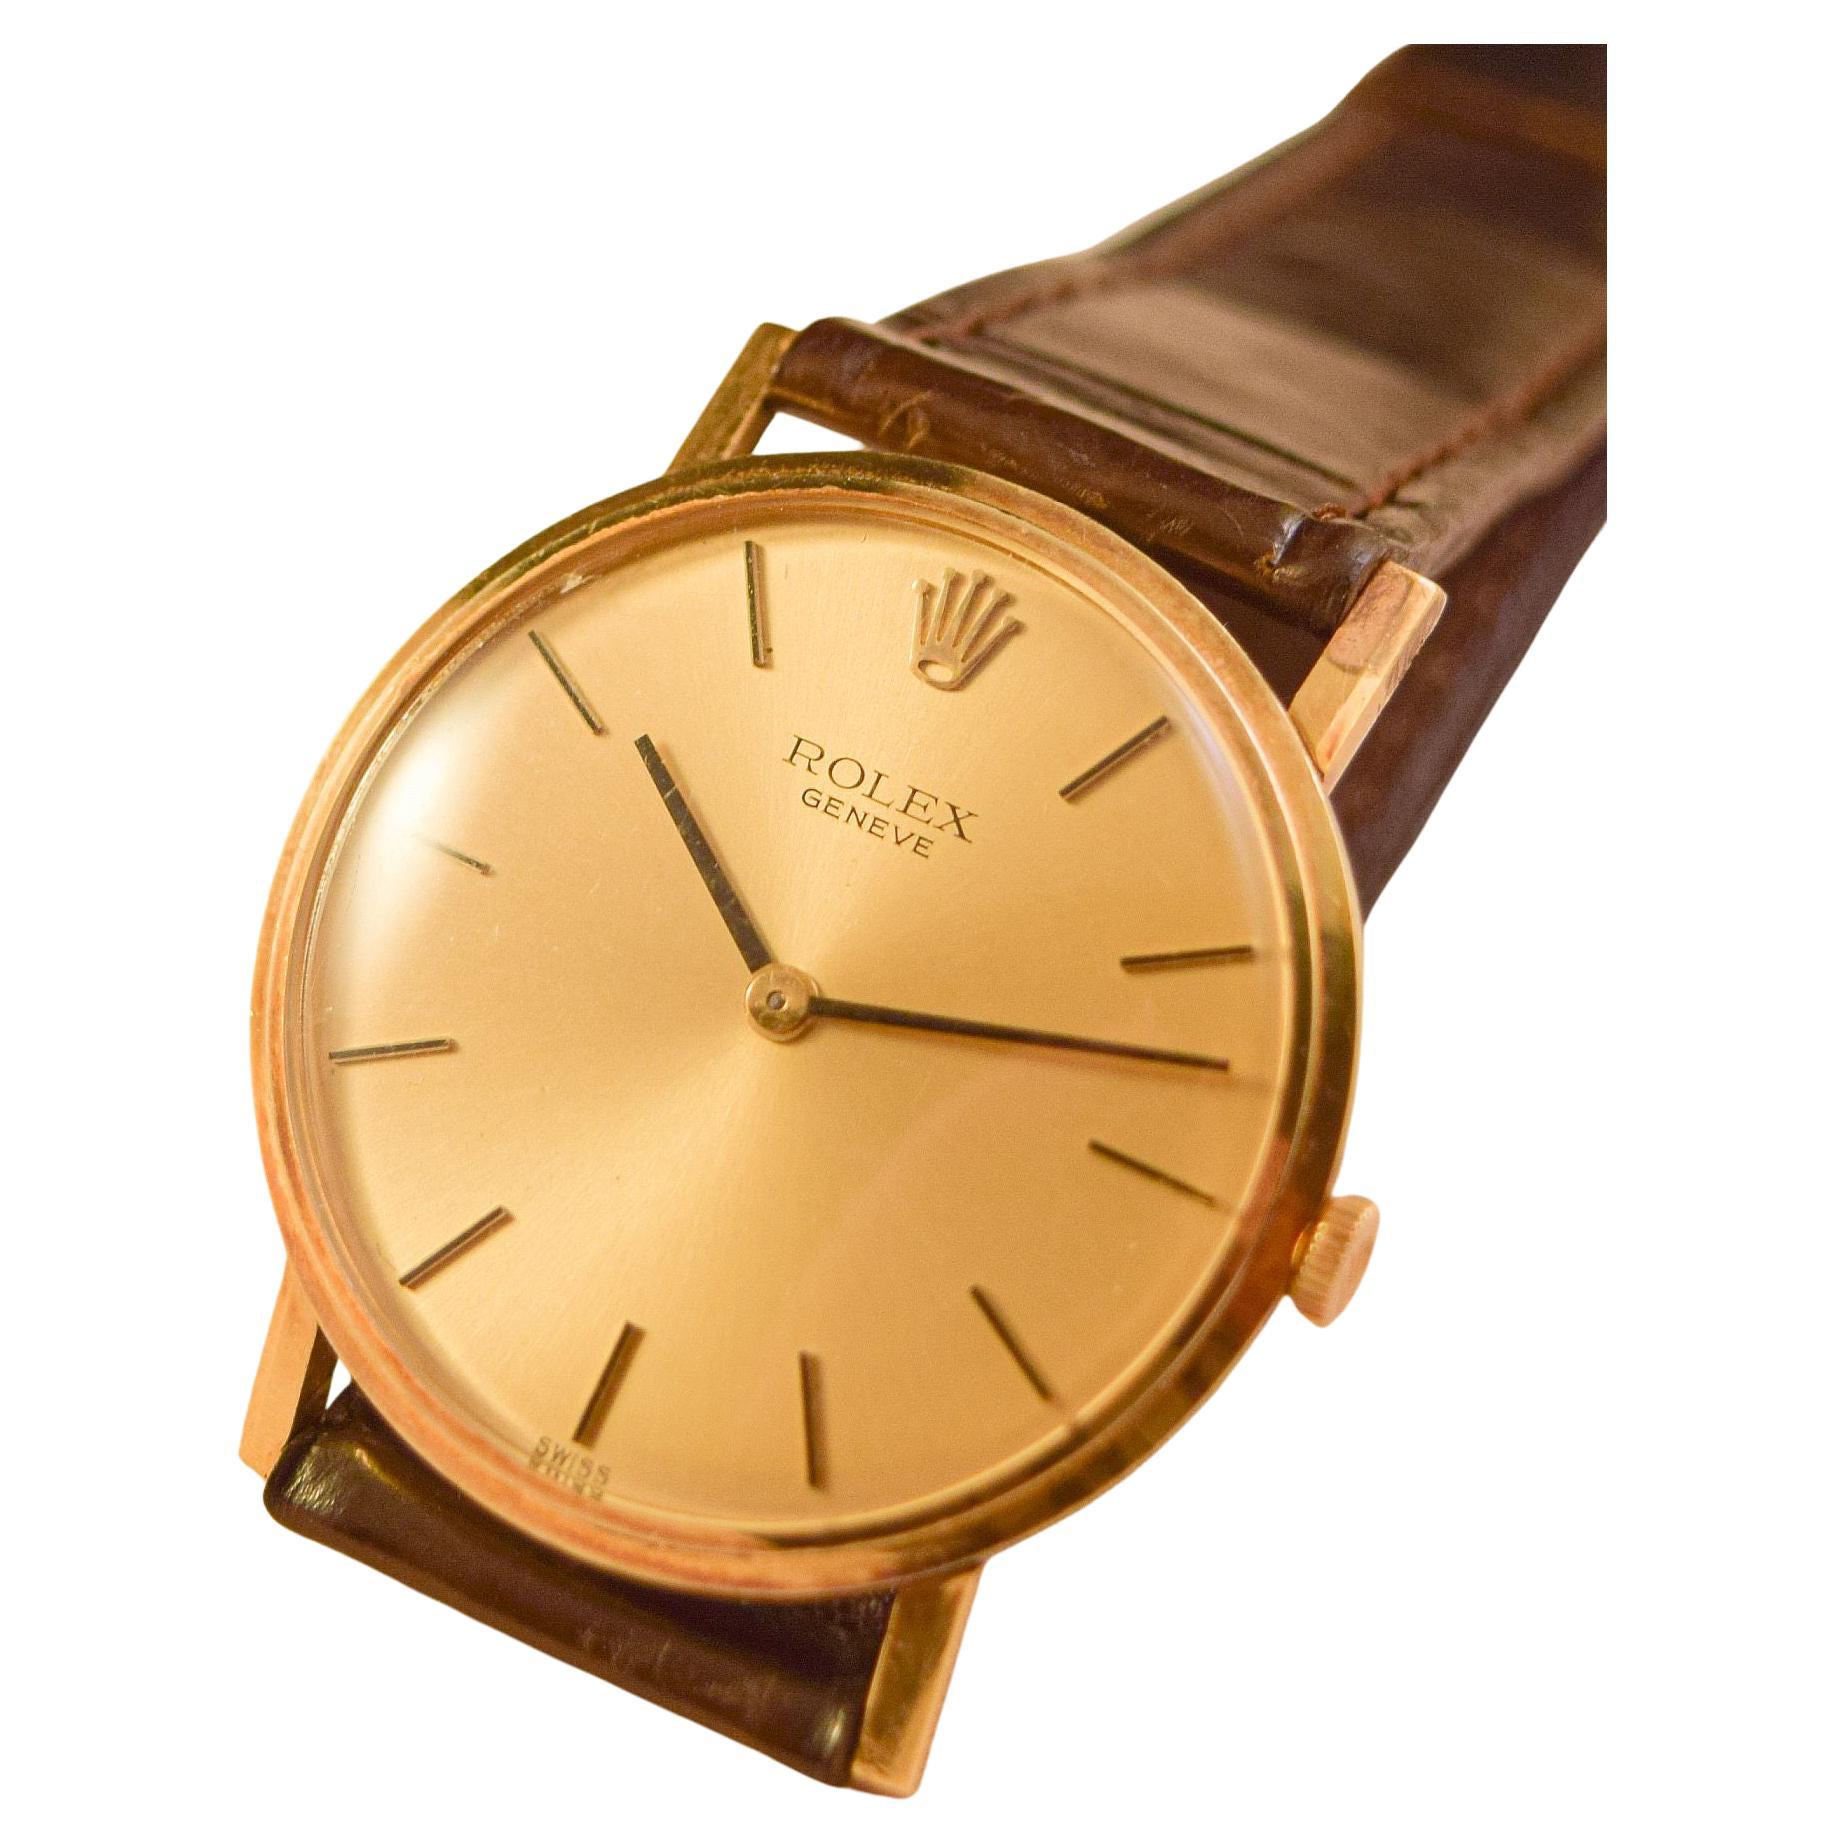 Rolex Geneve
Rolex a very elegant 18 Carat gold watch.
A very slim watch really extra thin and light watch to wear.
Manual Hand winding,
1960's
This watch is in amazing condition it must have been kept in safe many years.
The person who used it